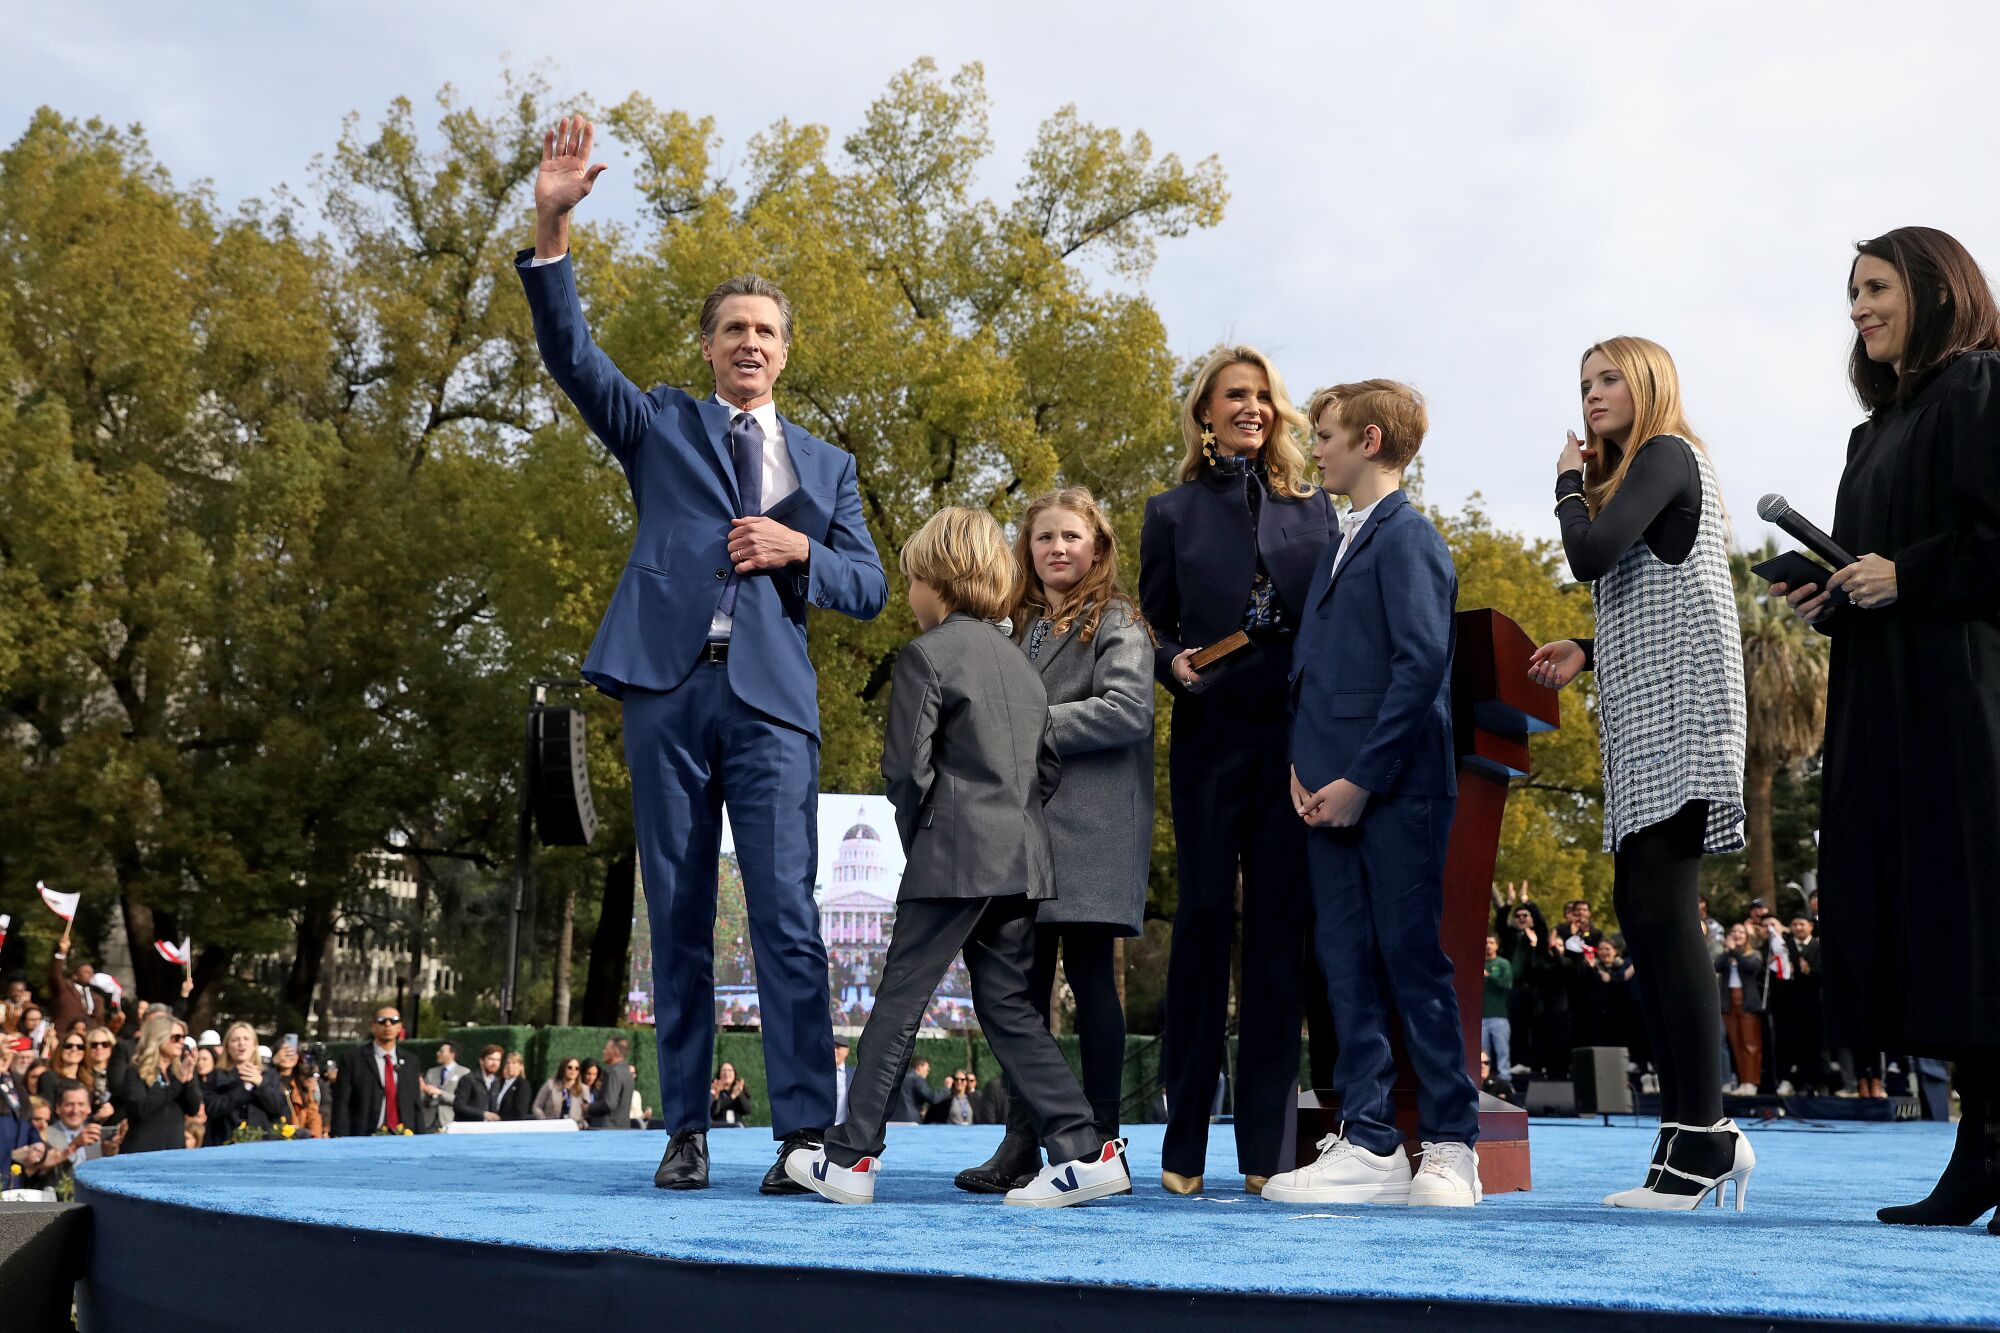 Governor Gavin Newsom waving from the stage with his family.